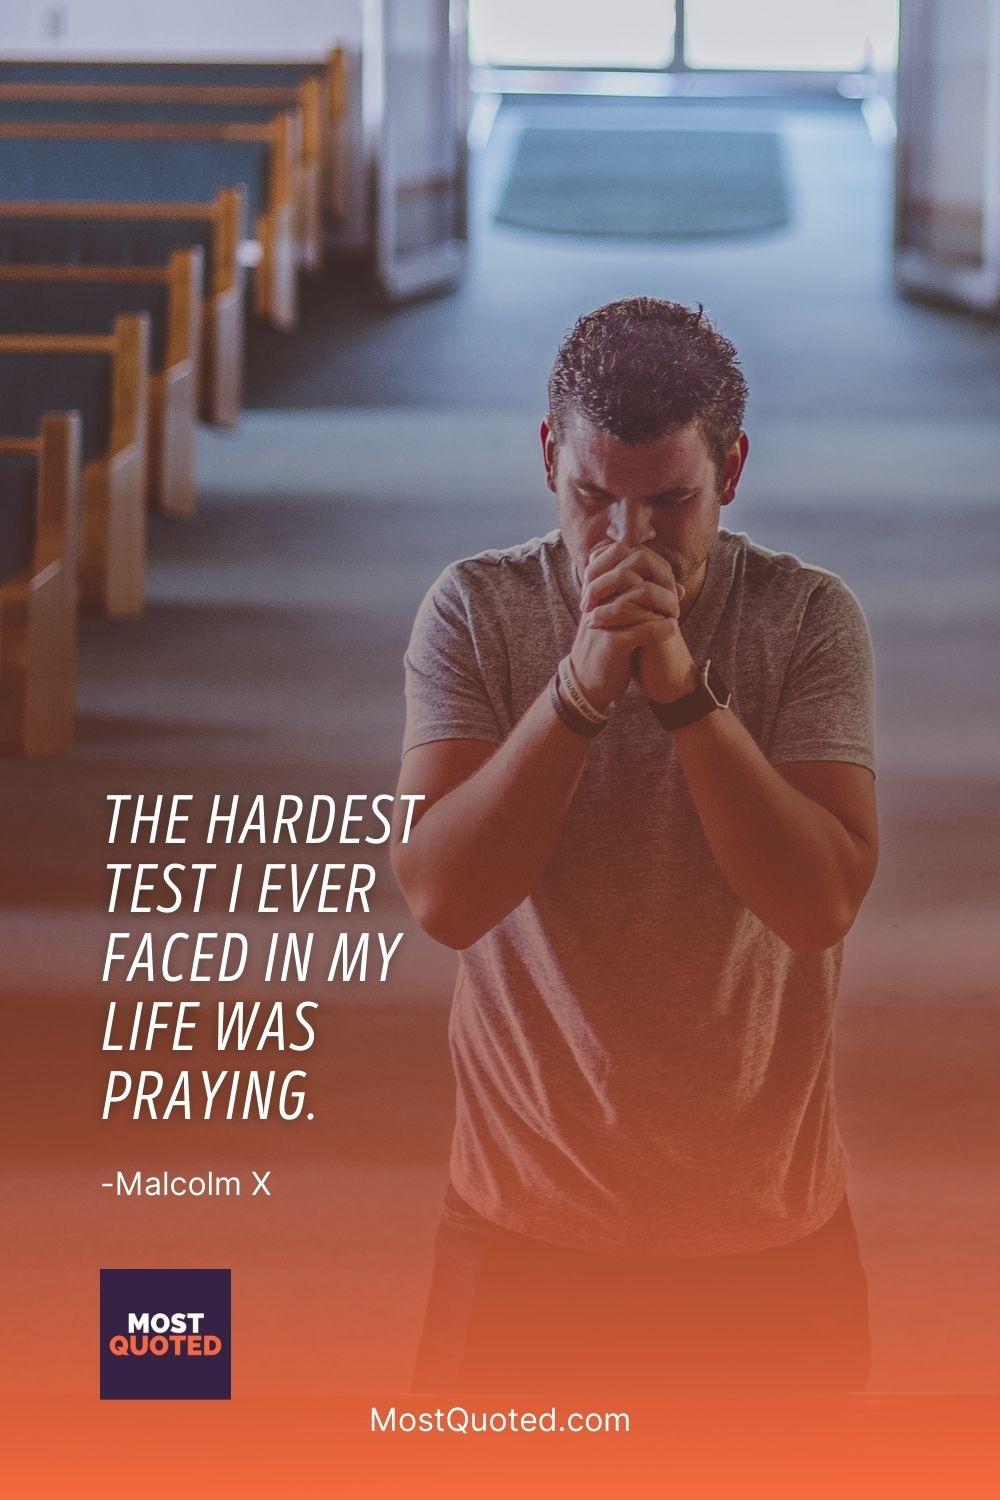 The hardest test I ever faced in my life was praying.